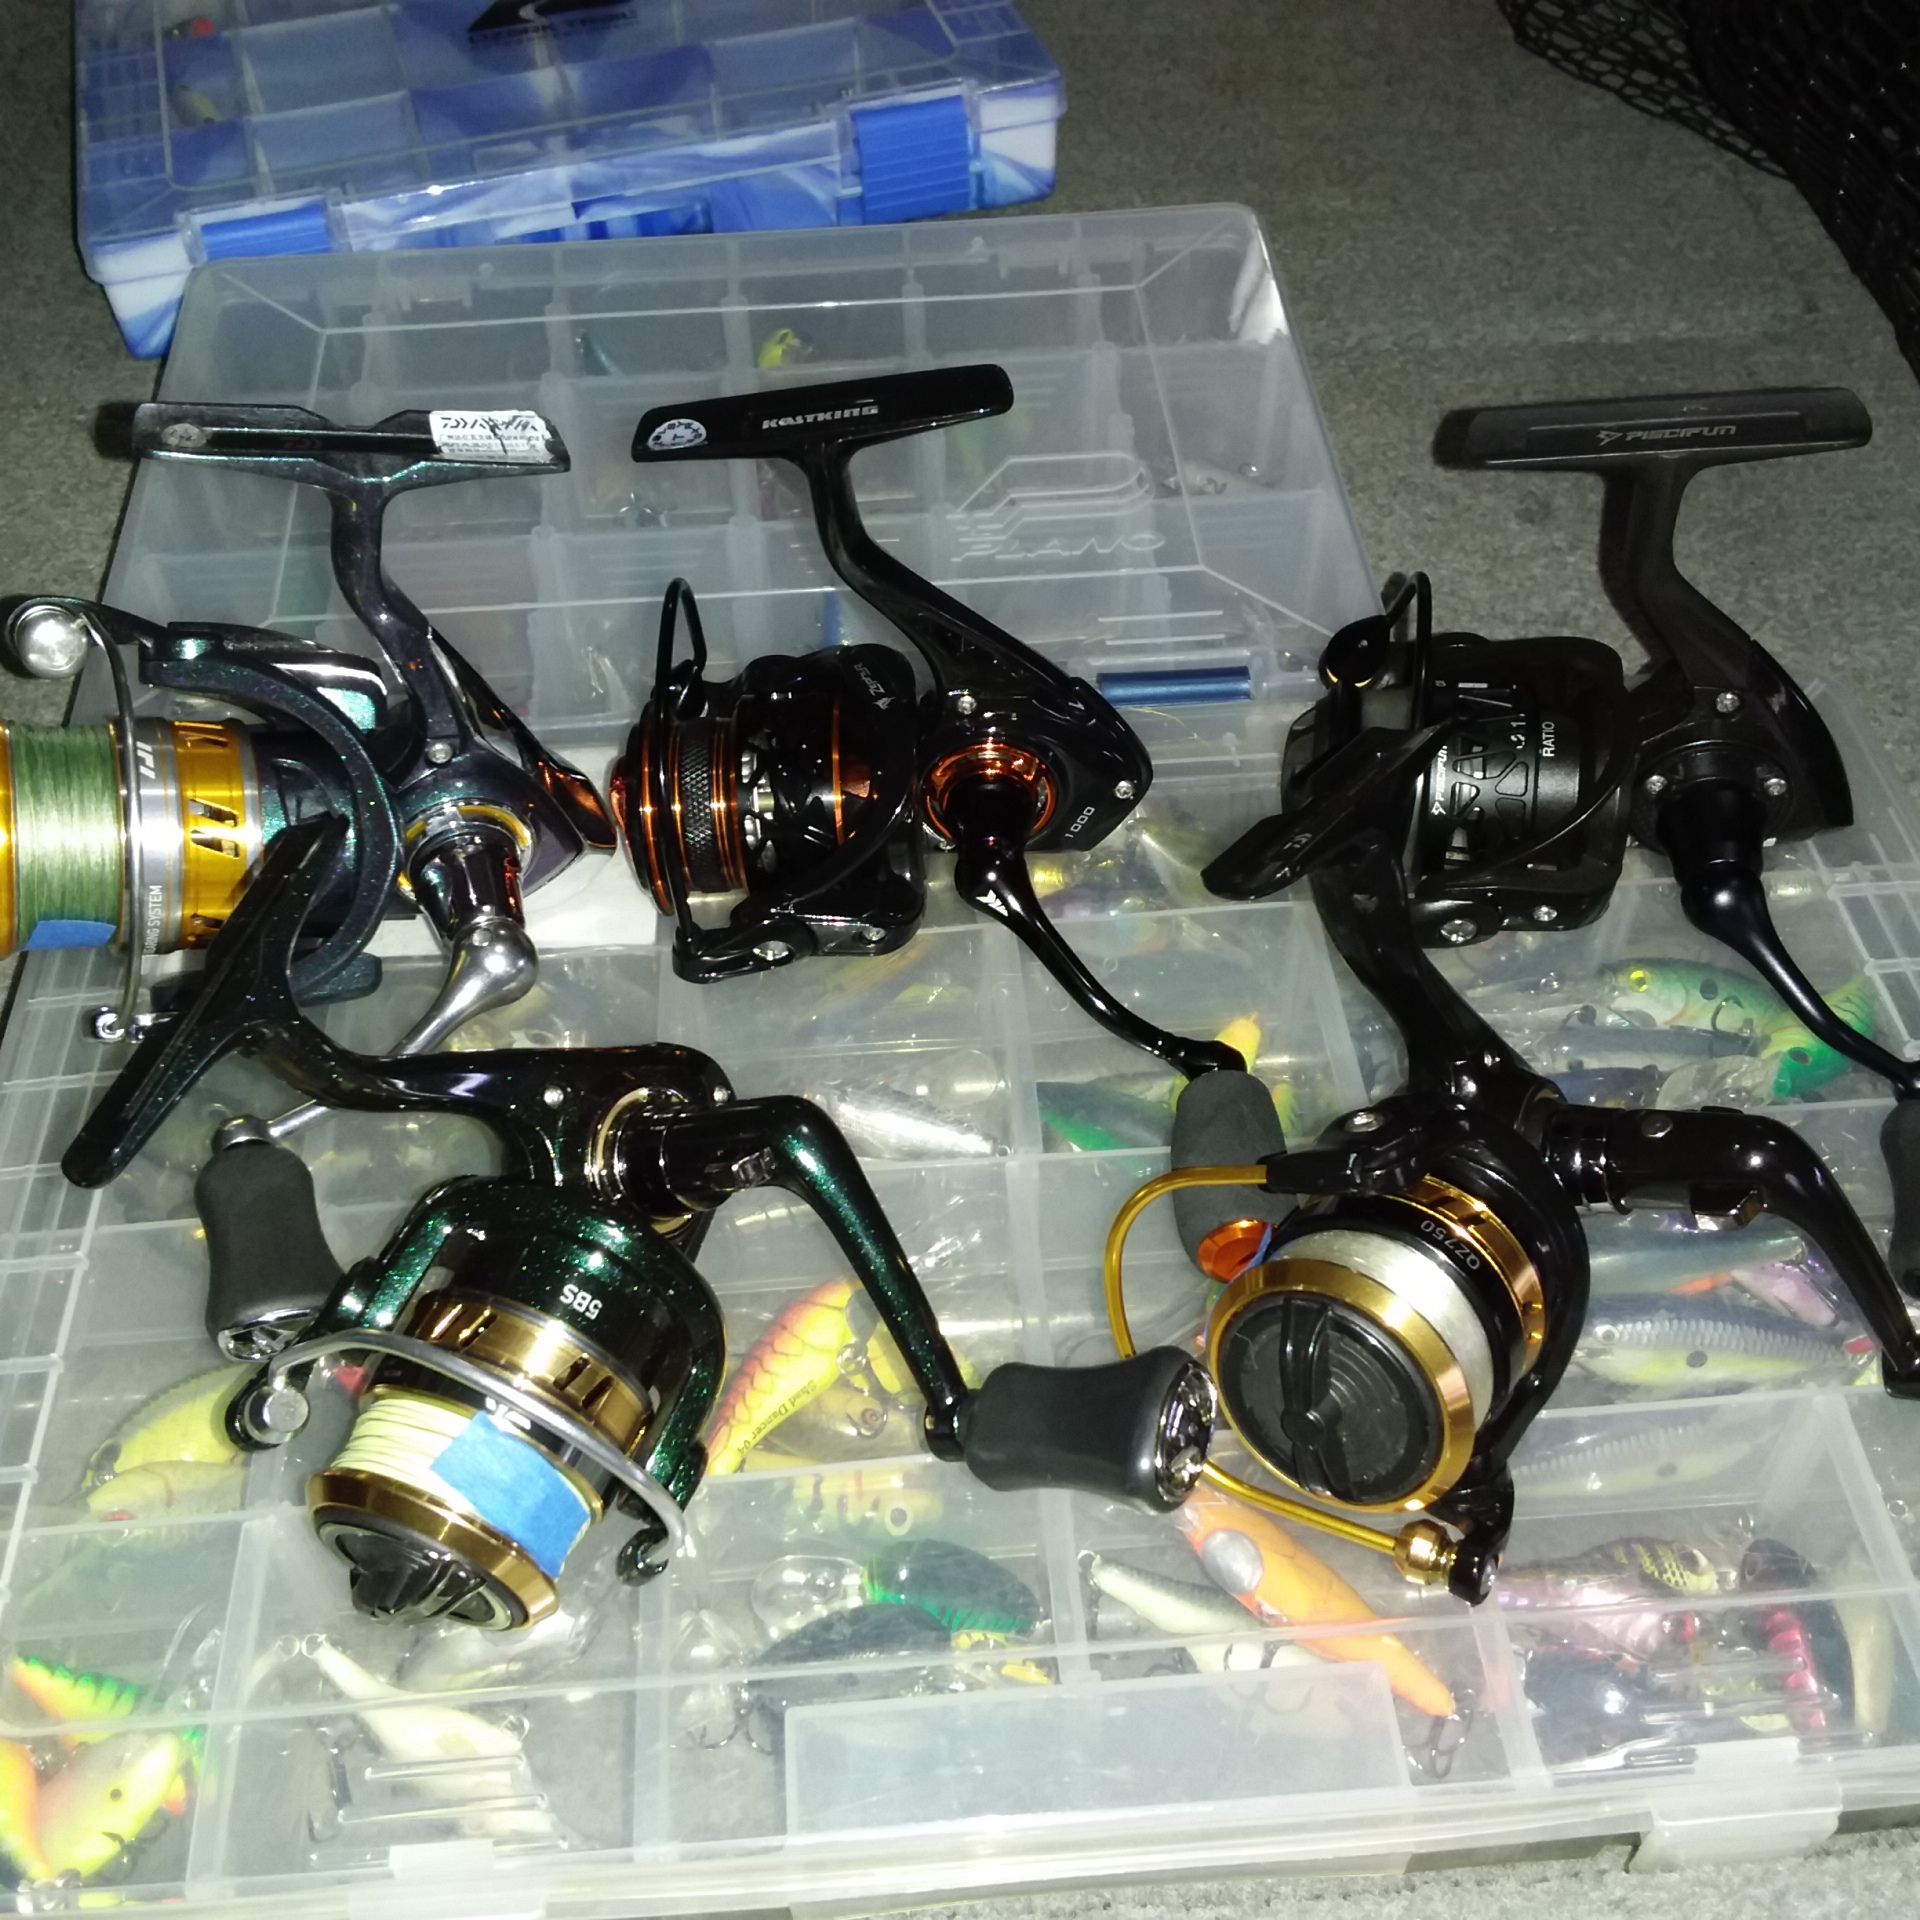 Upgrading my Ultralight (<$100) - Other Fish Species - Bass Fishing Forums